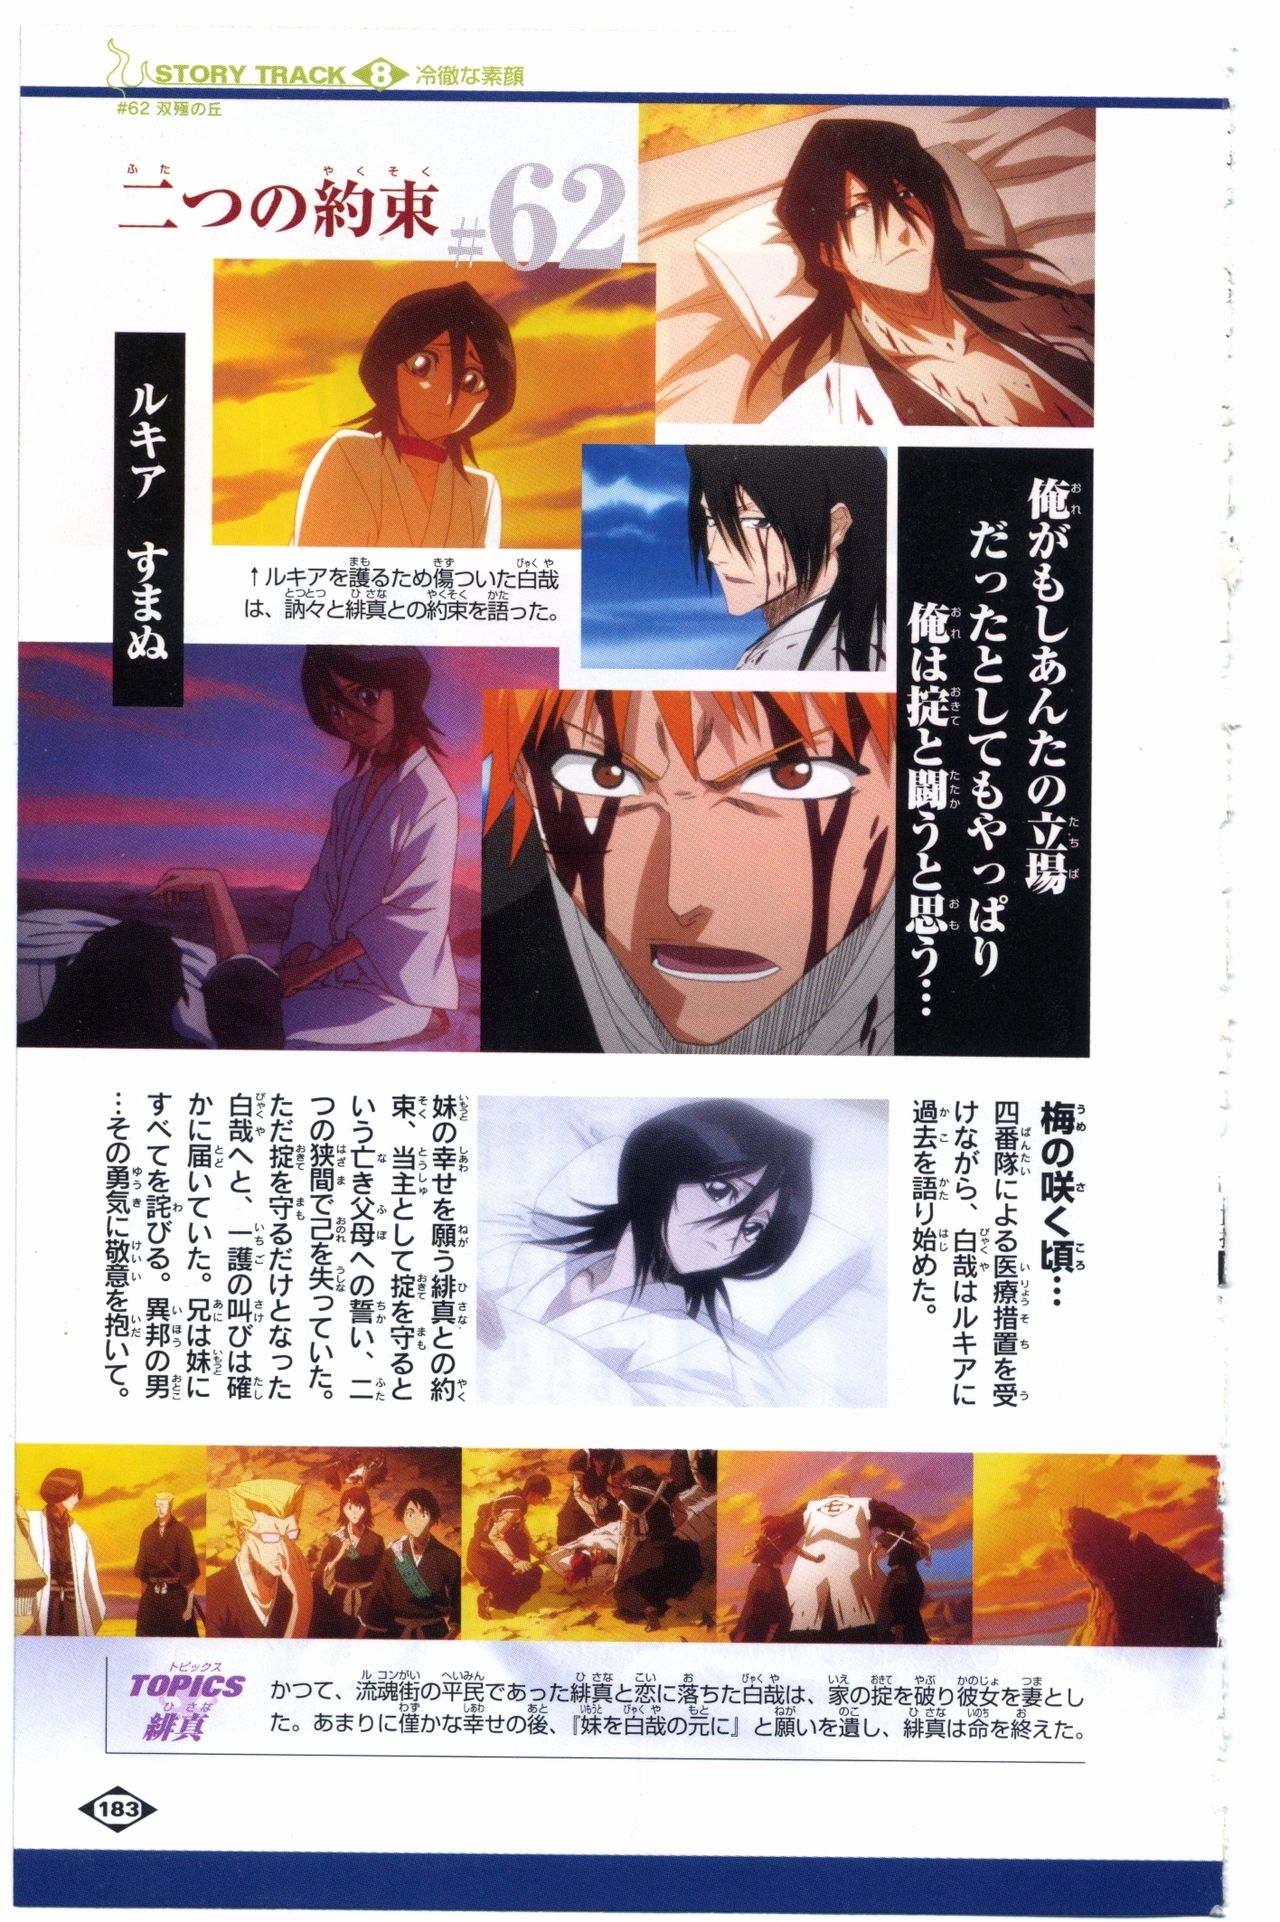 Bleach: Official Animation Book VIBEs 183